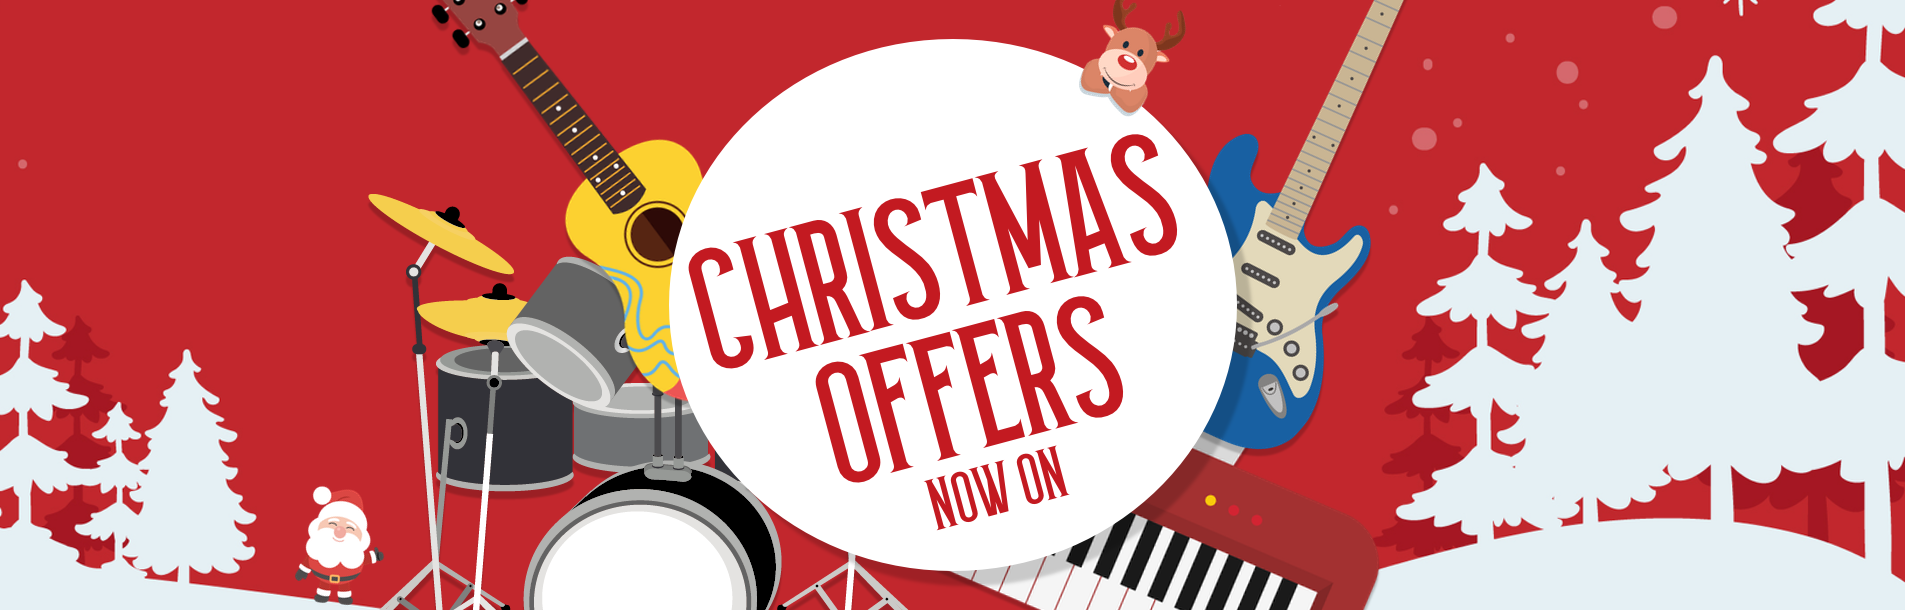 Christmas Music Instruments Sales UK and Northern Ireland